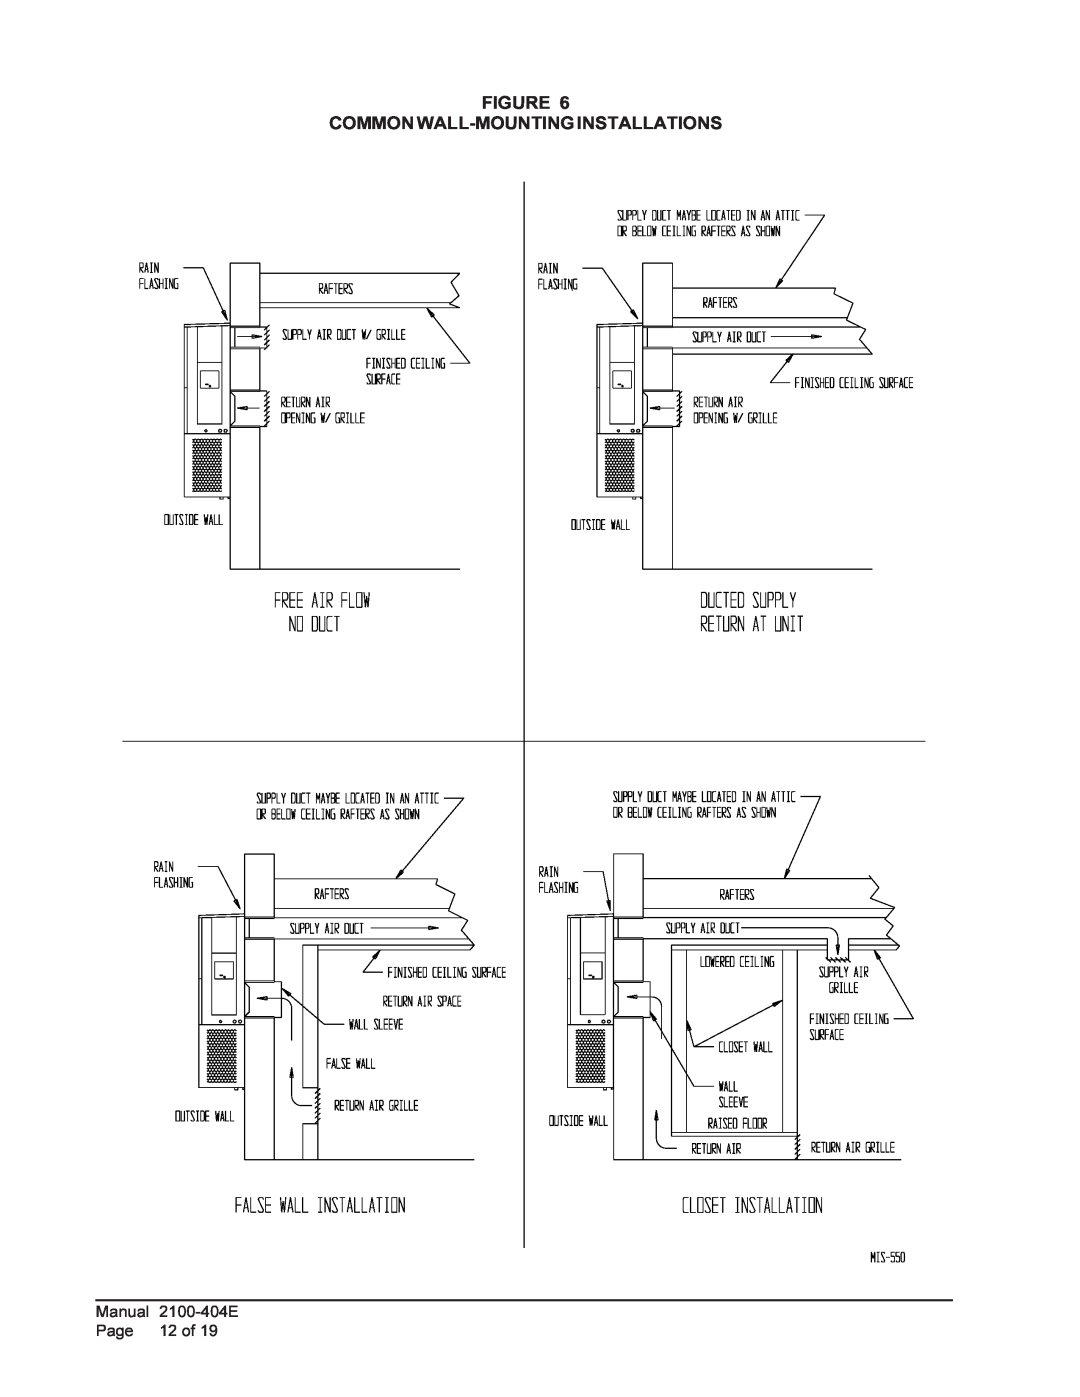 Bard 2100-404E installation instructions Figure Common Wall-Mountinginstallations, Manual, Page, 12 of 